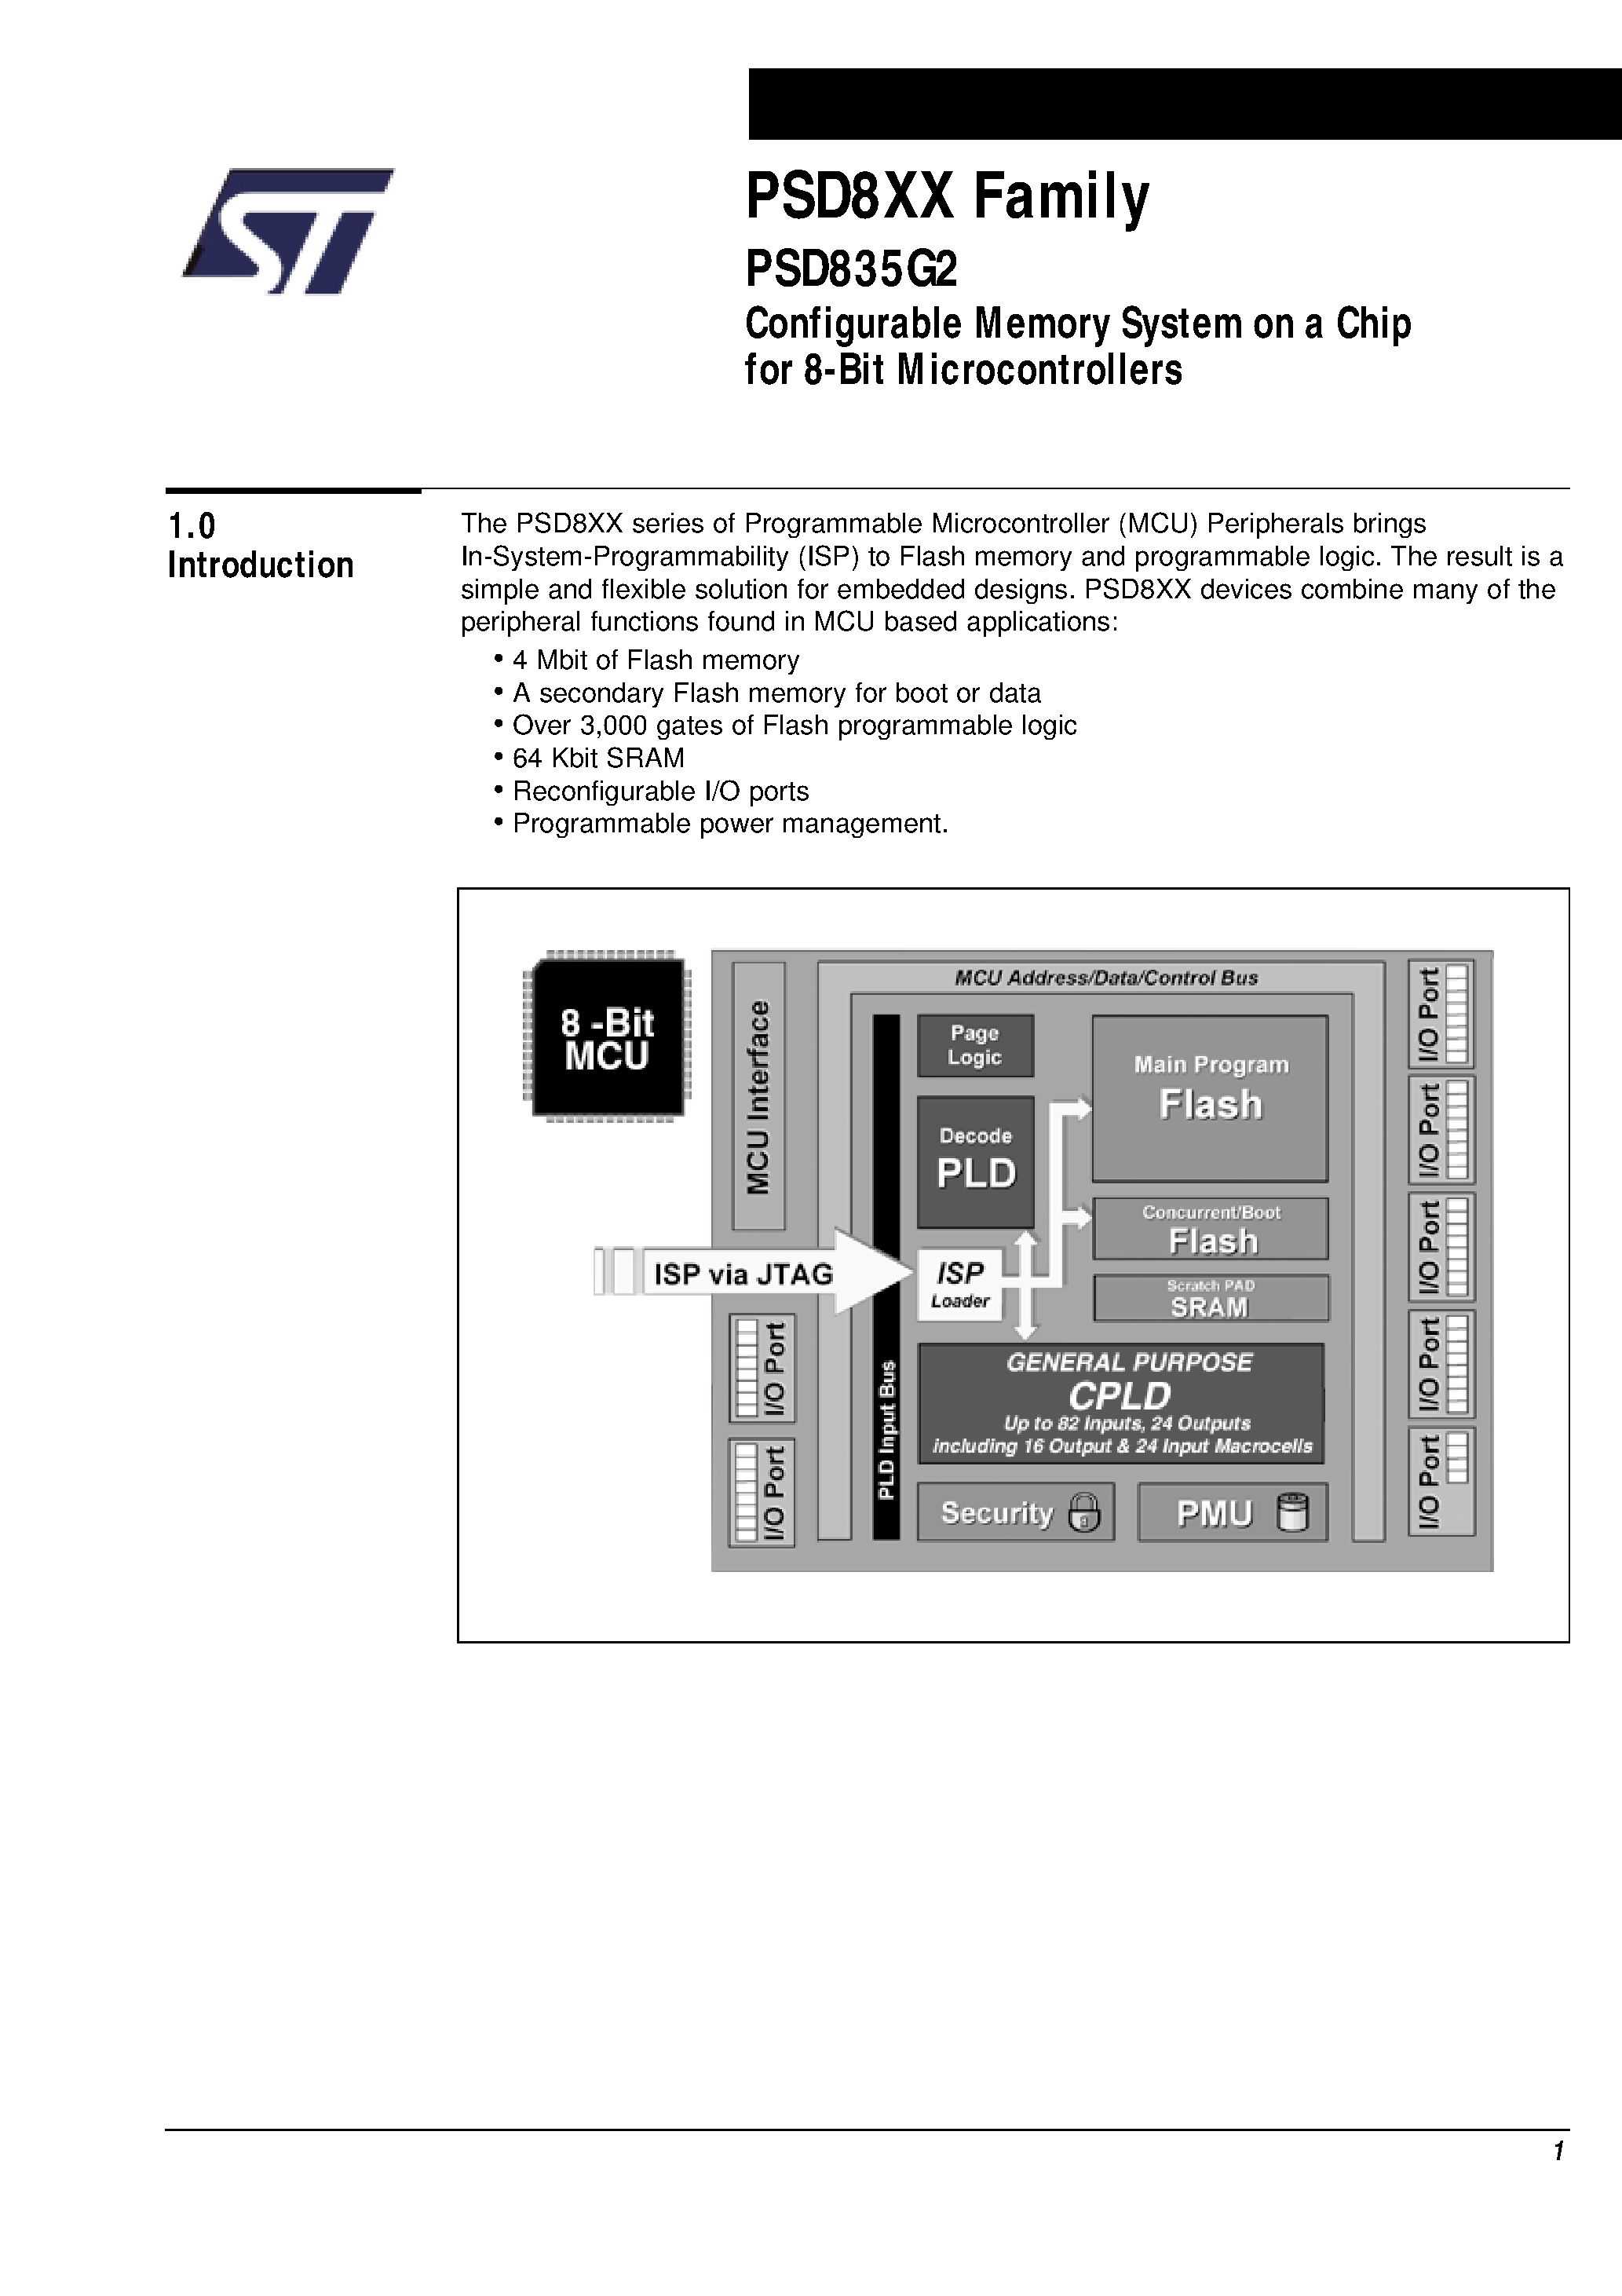 Datasheet PSD835F2V-A-20UI - Configurable Memory System on a Chip for 8-Bit Microcontrollers page 2